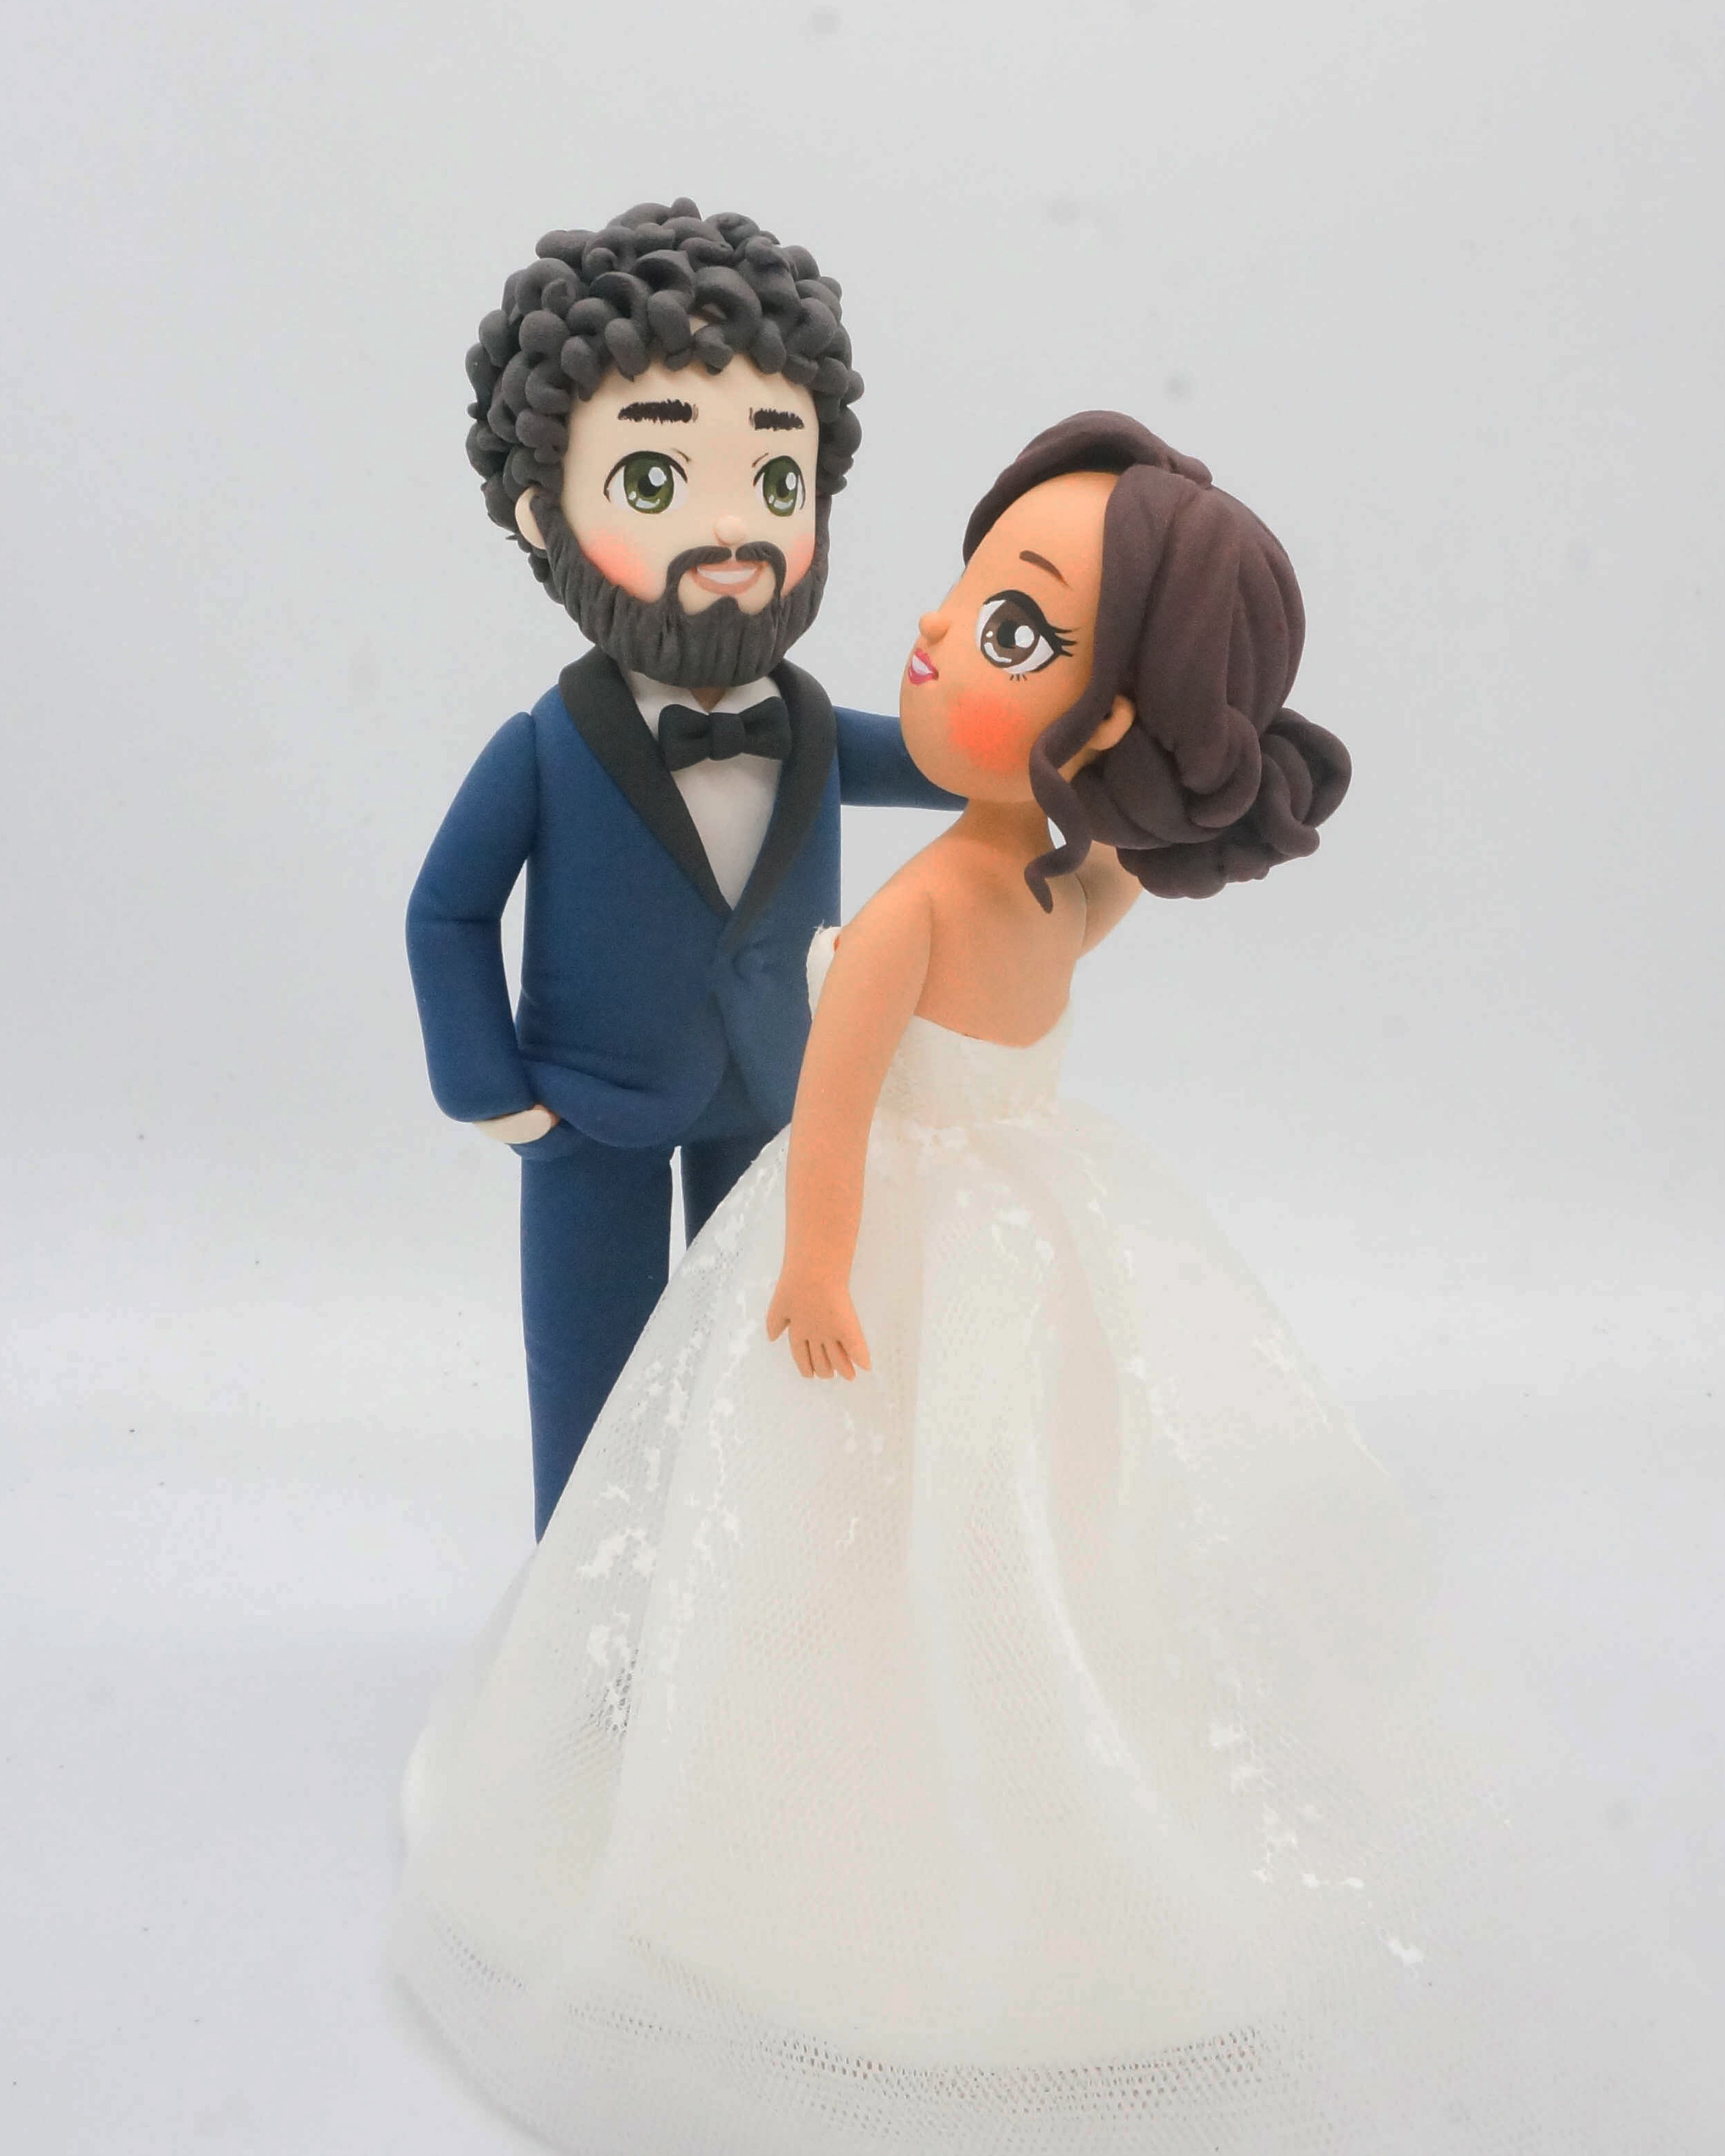 Picture of First Dance Wedding Dance wedding cake topper, Curly Hair Groom and Bun Bride Topper